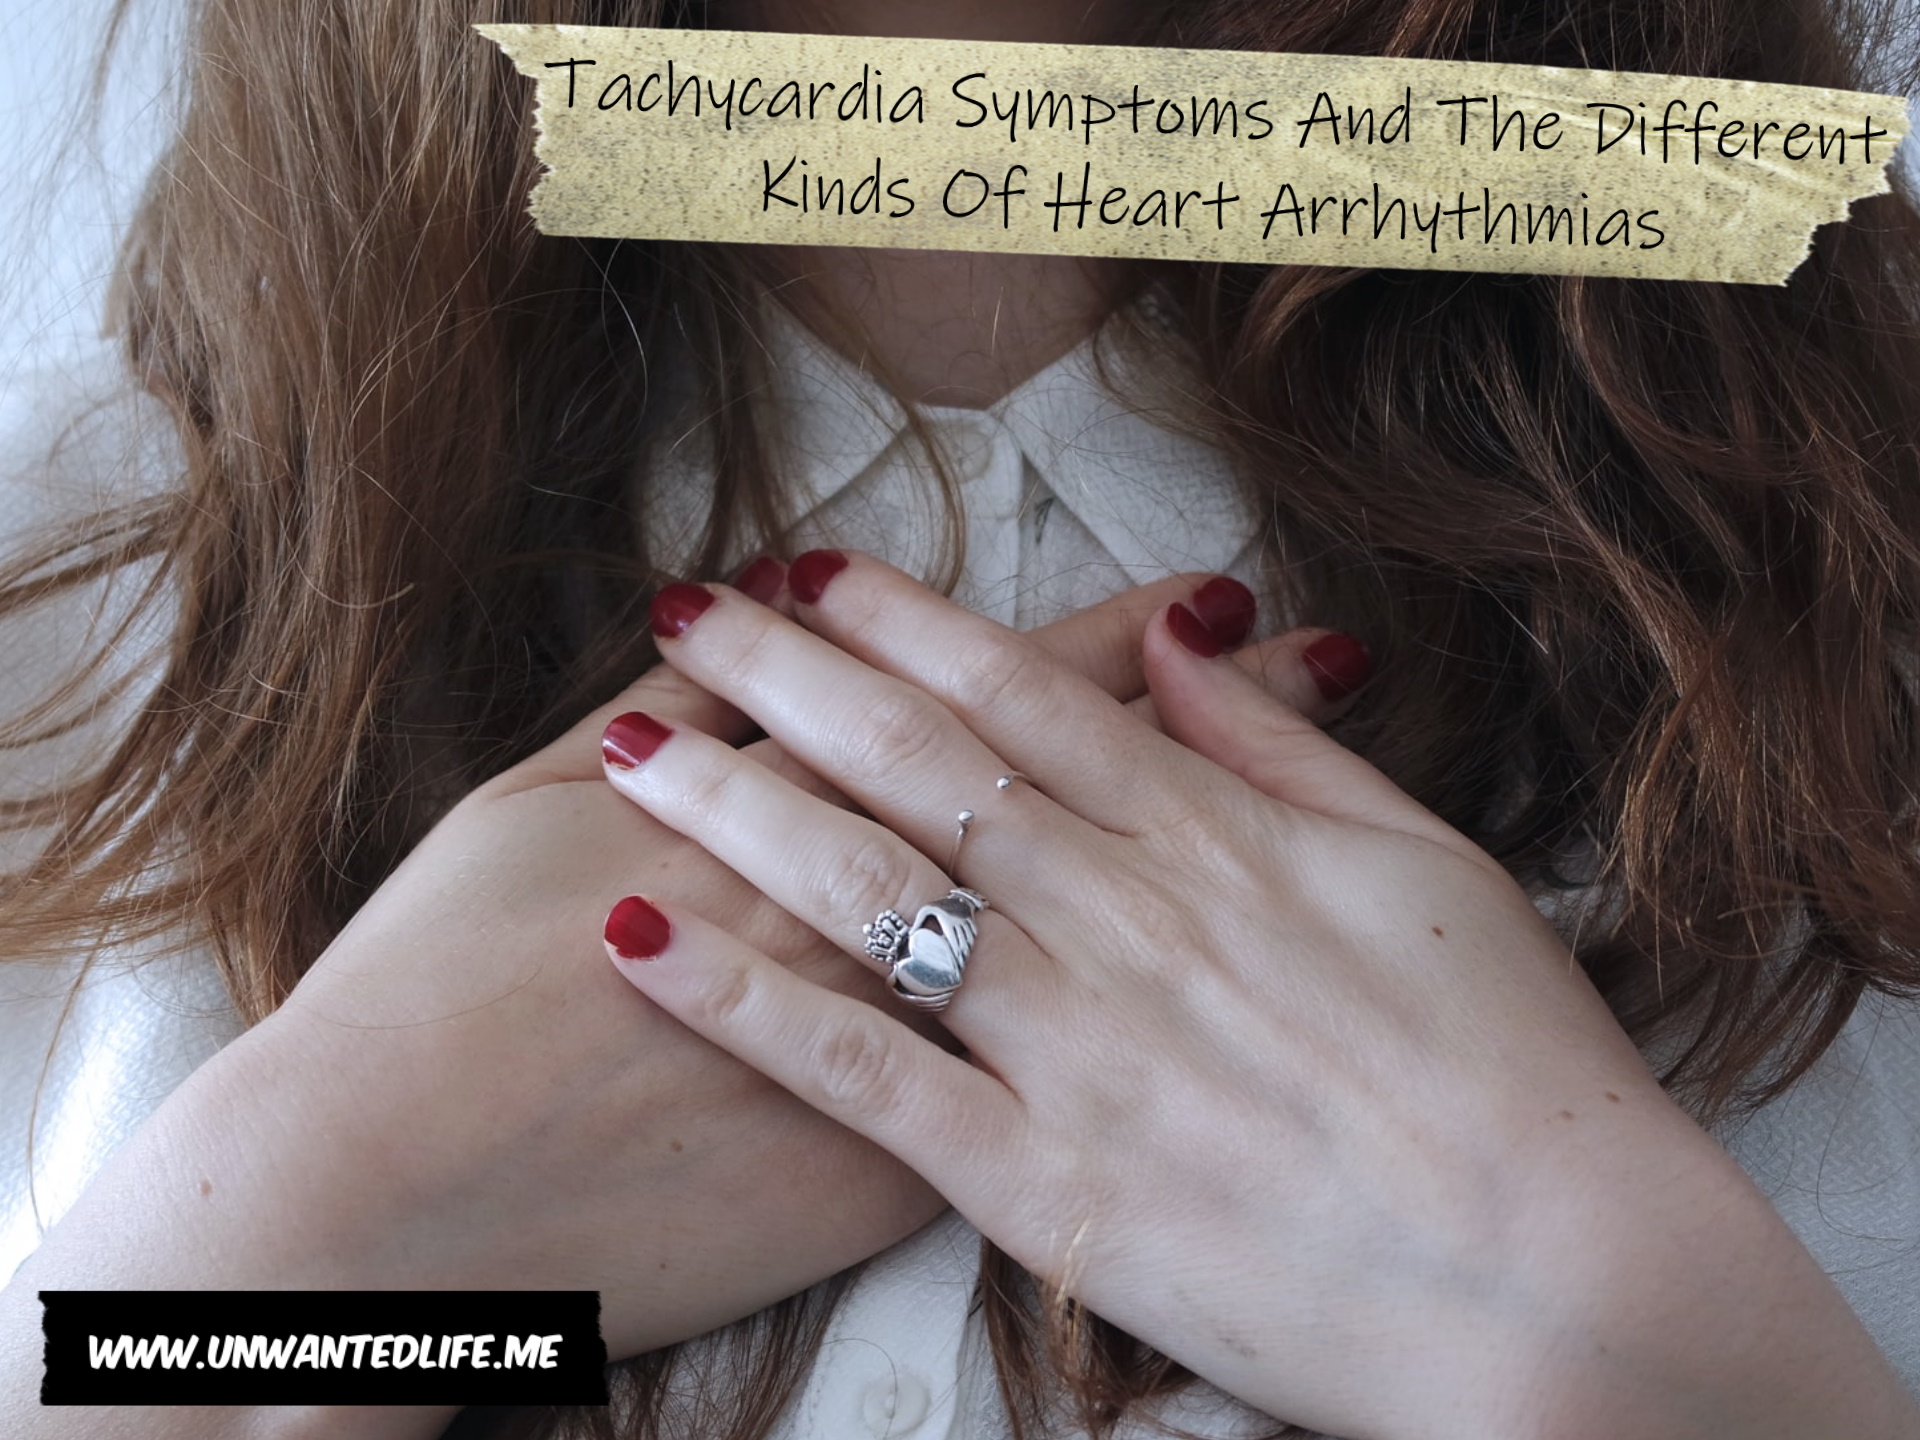 A white woman holding her hands to her chest while wearing a heart shaped ring on her finger to represent the topic of the article - Tachycardia Symptoms And The Different Kinds Of Heart Arrhythmias